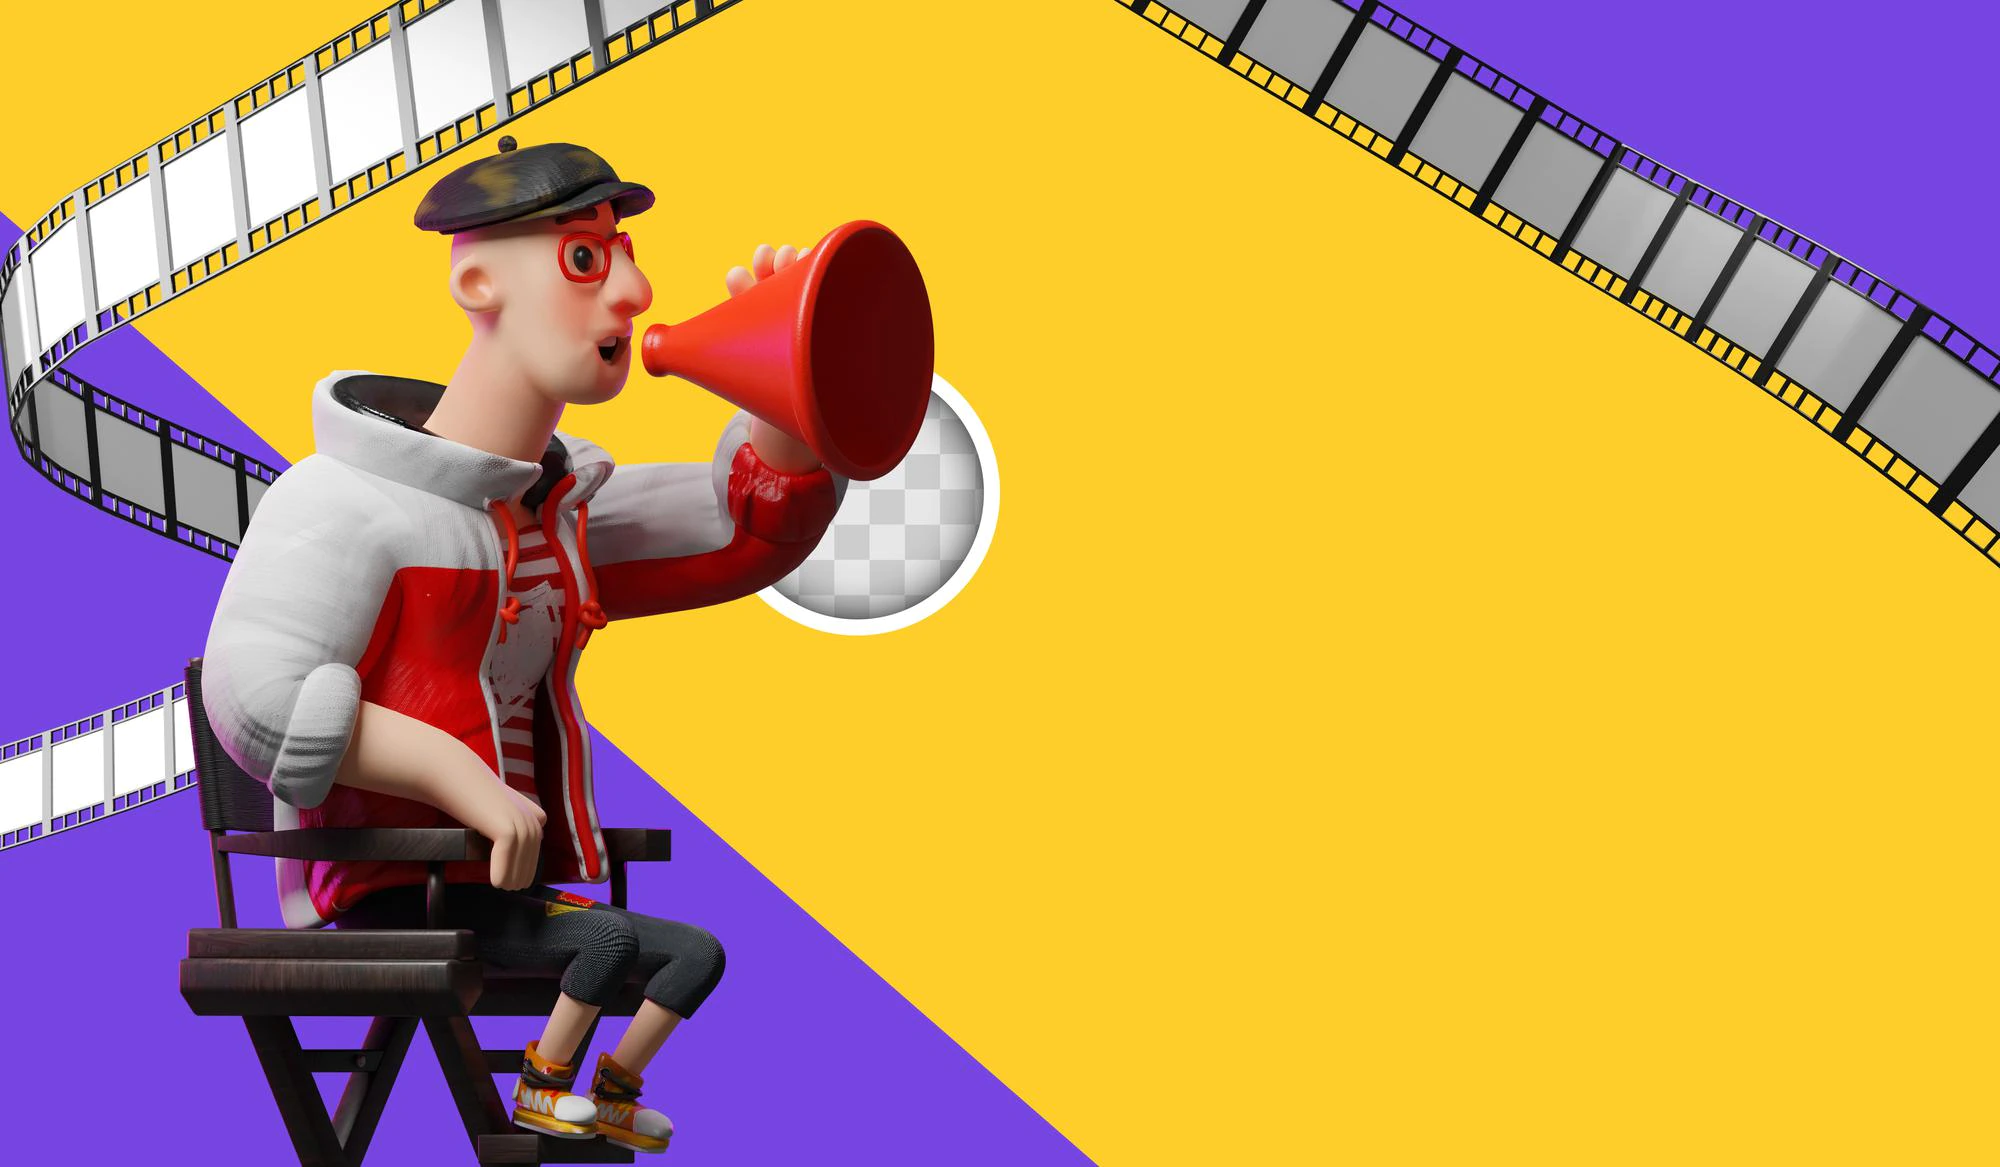 cinema banner with tapes 3d illustration 1419 2562